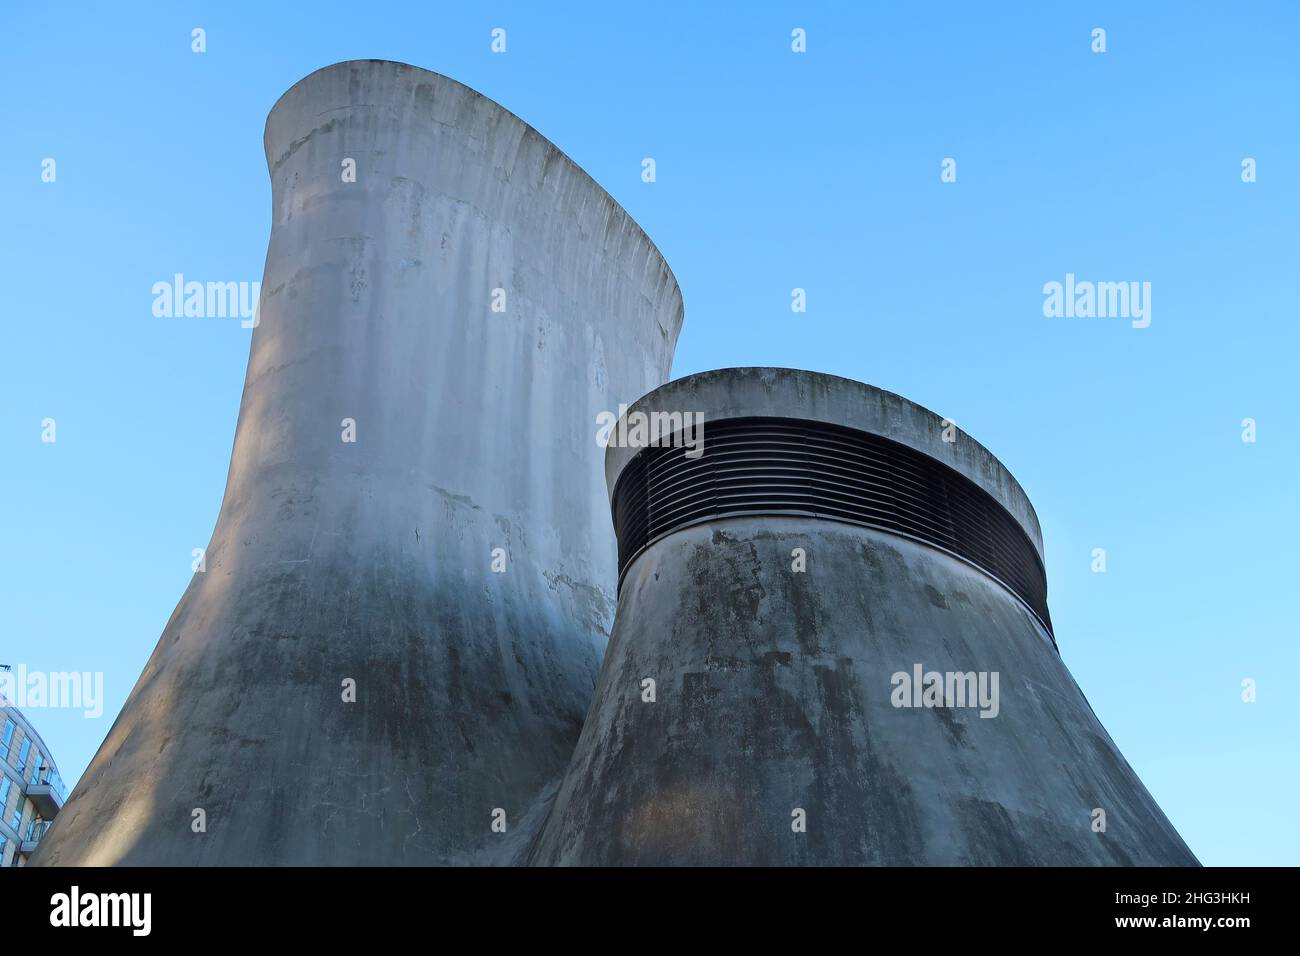 Concrete vents to the Blackwall Tunnel. Formed of Gunnite sprayed concrete. Designed by Sir Terry Farrell as a young architect at the GLC. Stock Photo